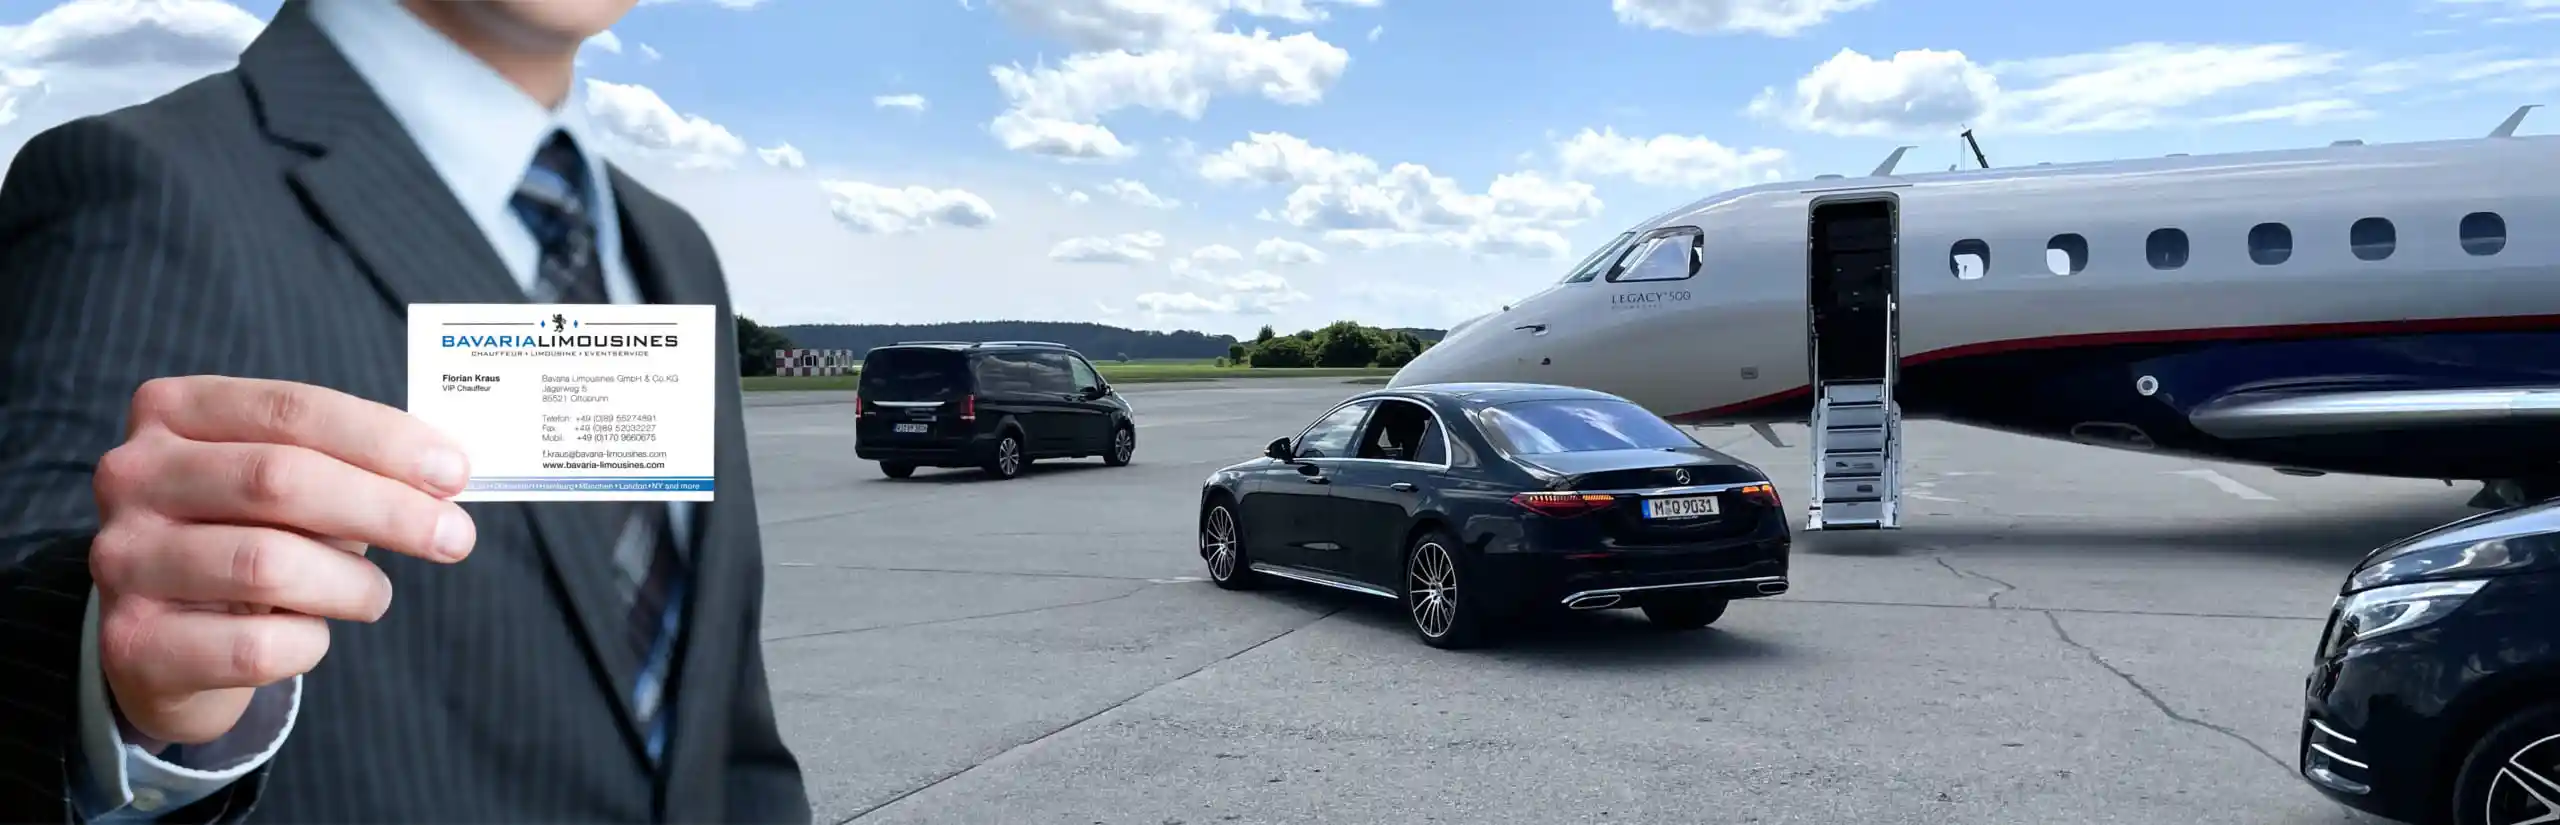 Chauffeur Service and VIP Chauffeur Service for Munich and all over Germany